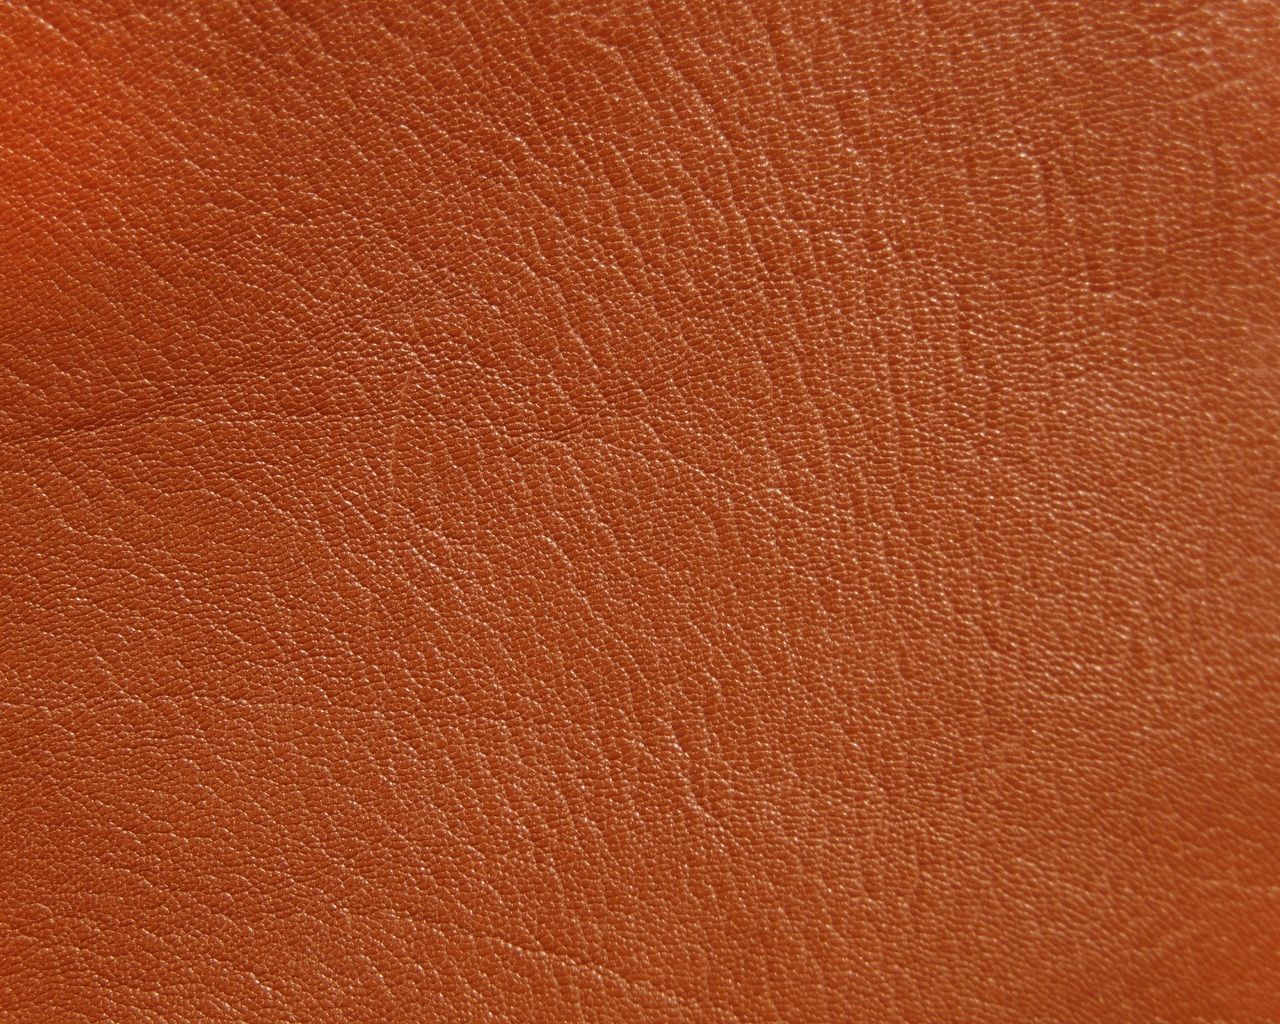 Brown Leather 5k 1280x1024 Resolution HD 4k Wallpaper, Image, Background, Photo and Picture